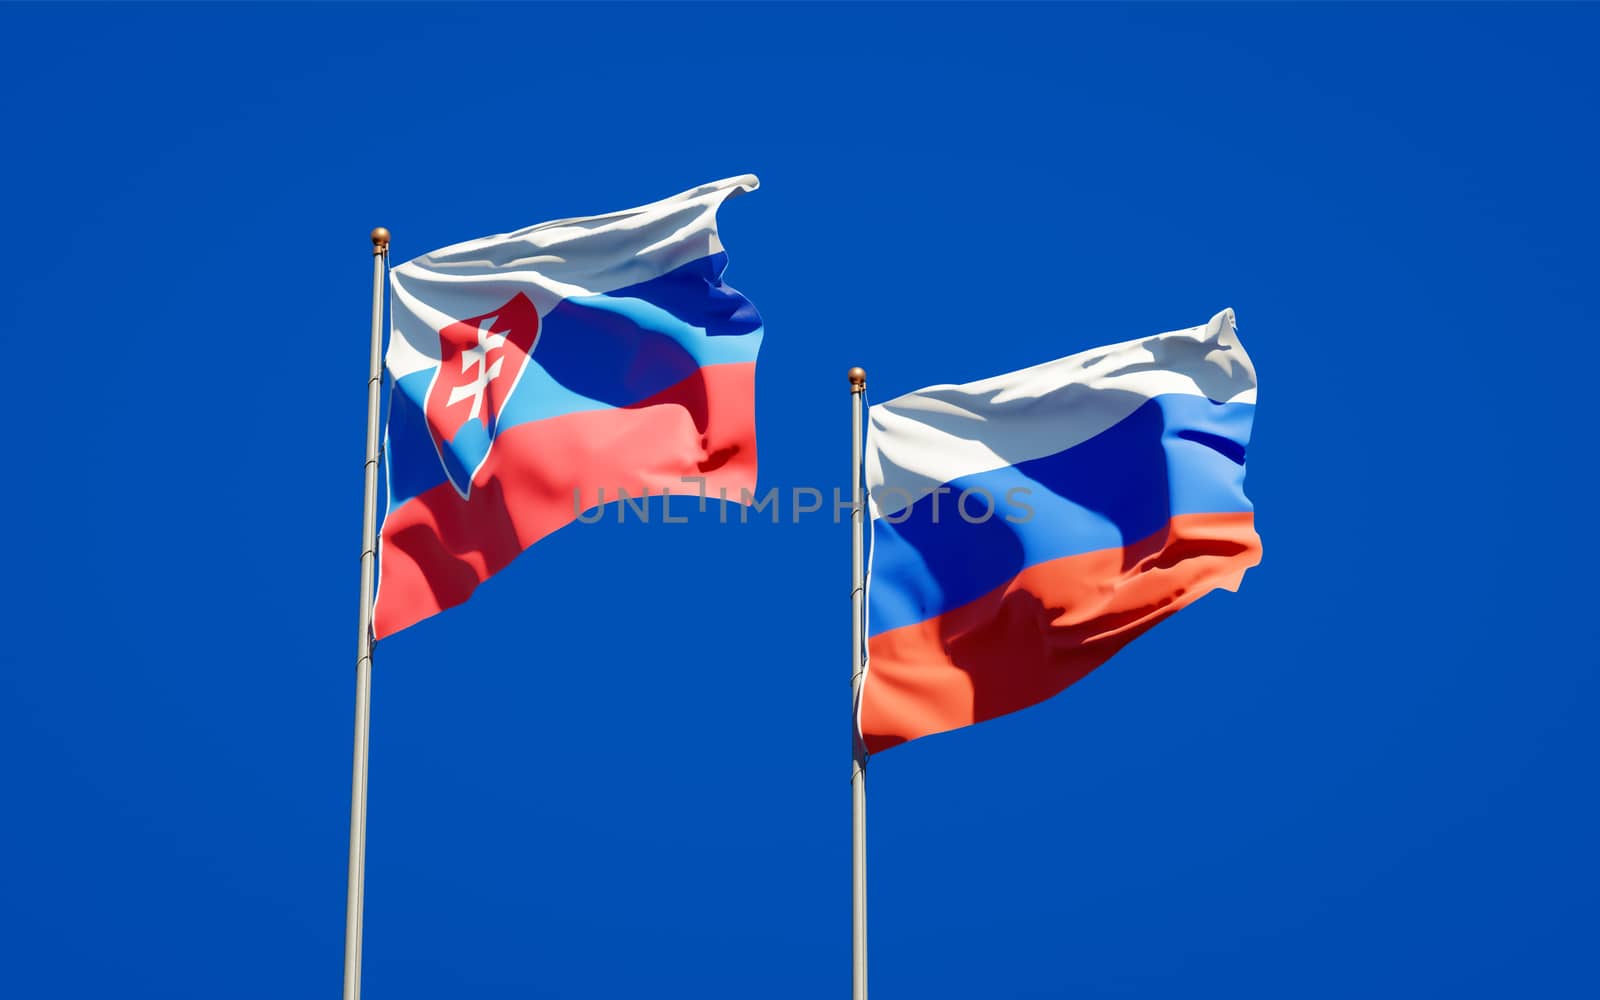 Beautiful national state flags of Slovakia and Russia together at the sky background. 3D artwork concept. 